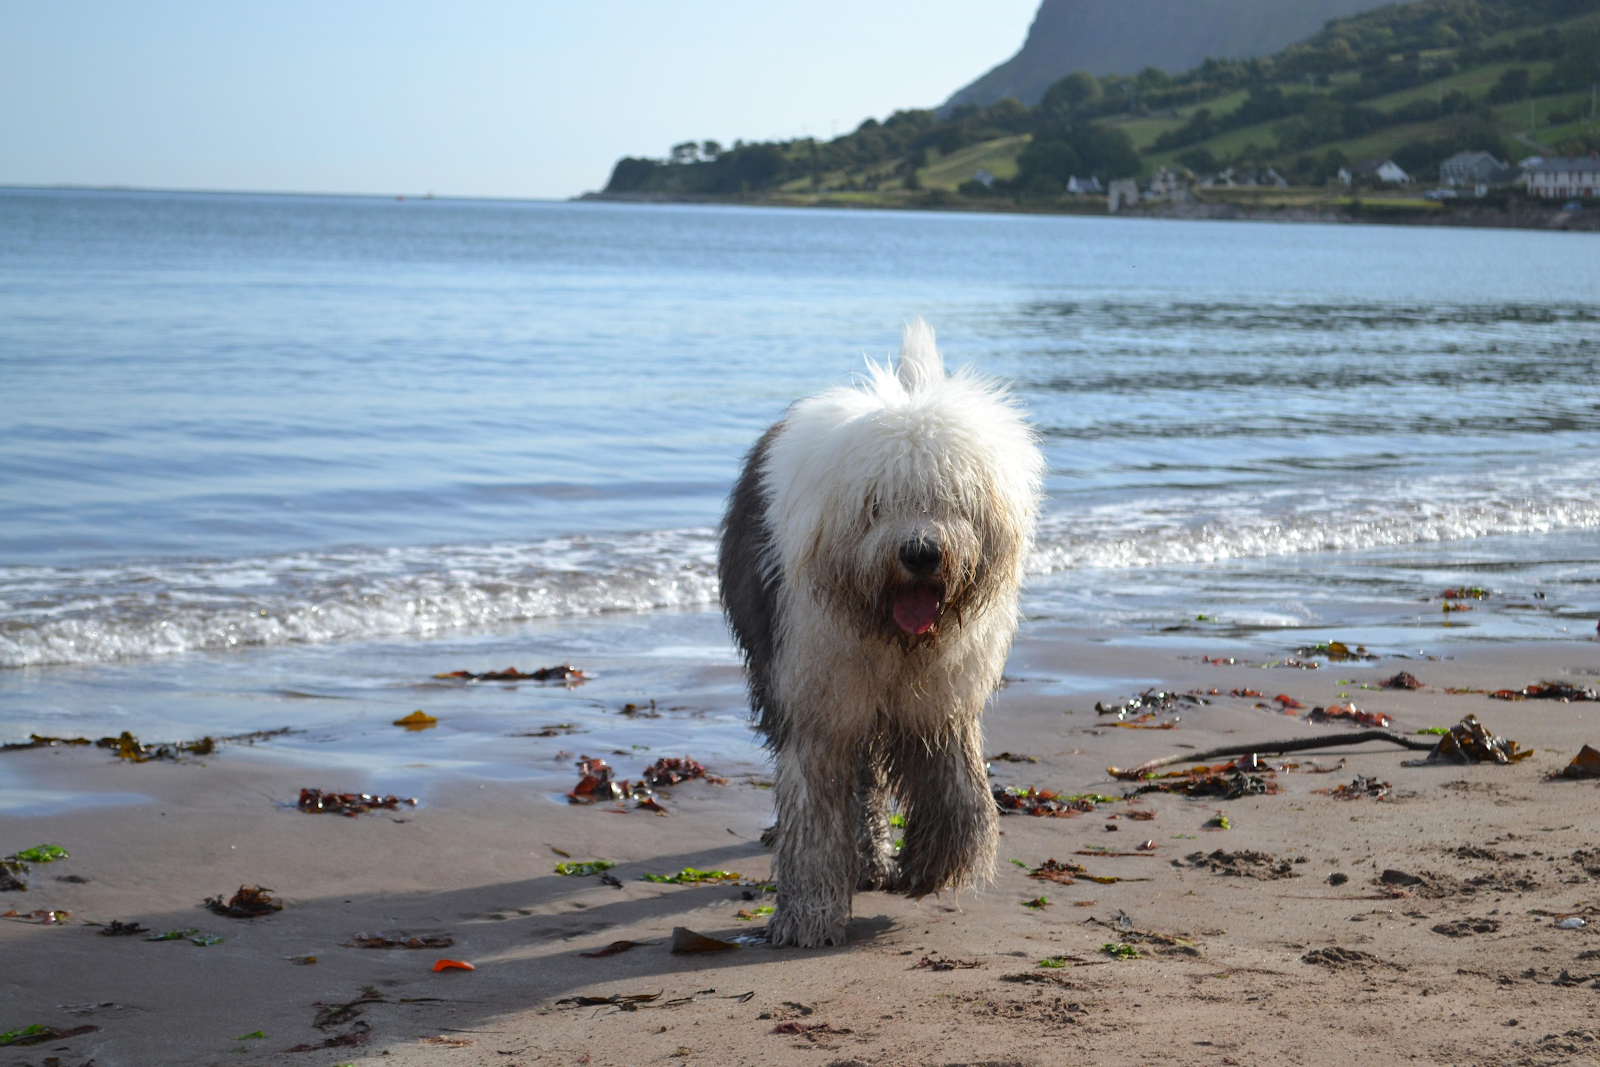 A large, fluffy, white and grey dog walks up the beach